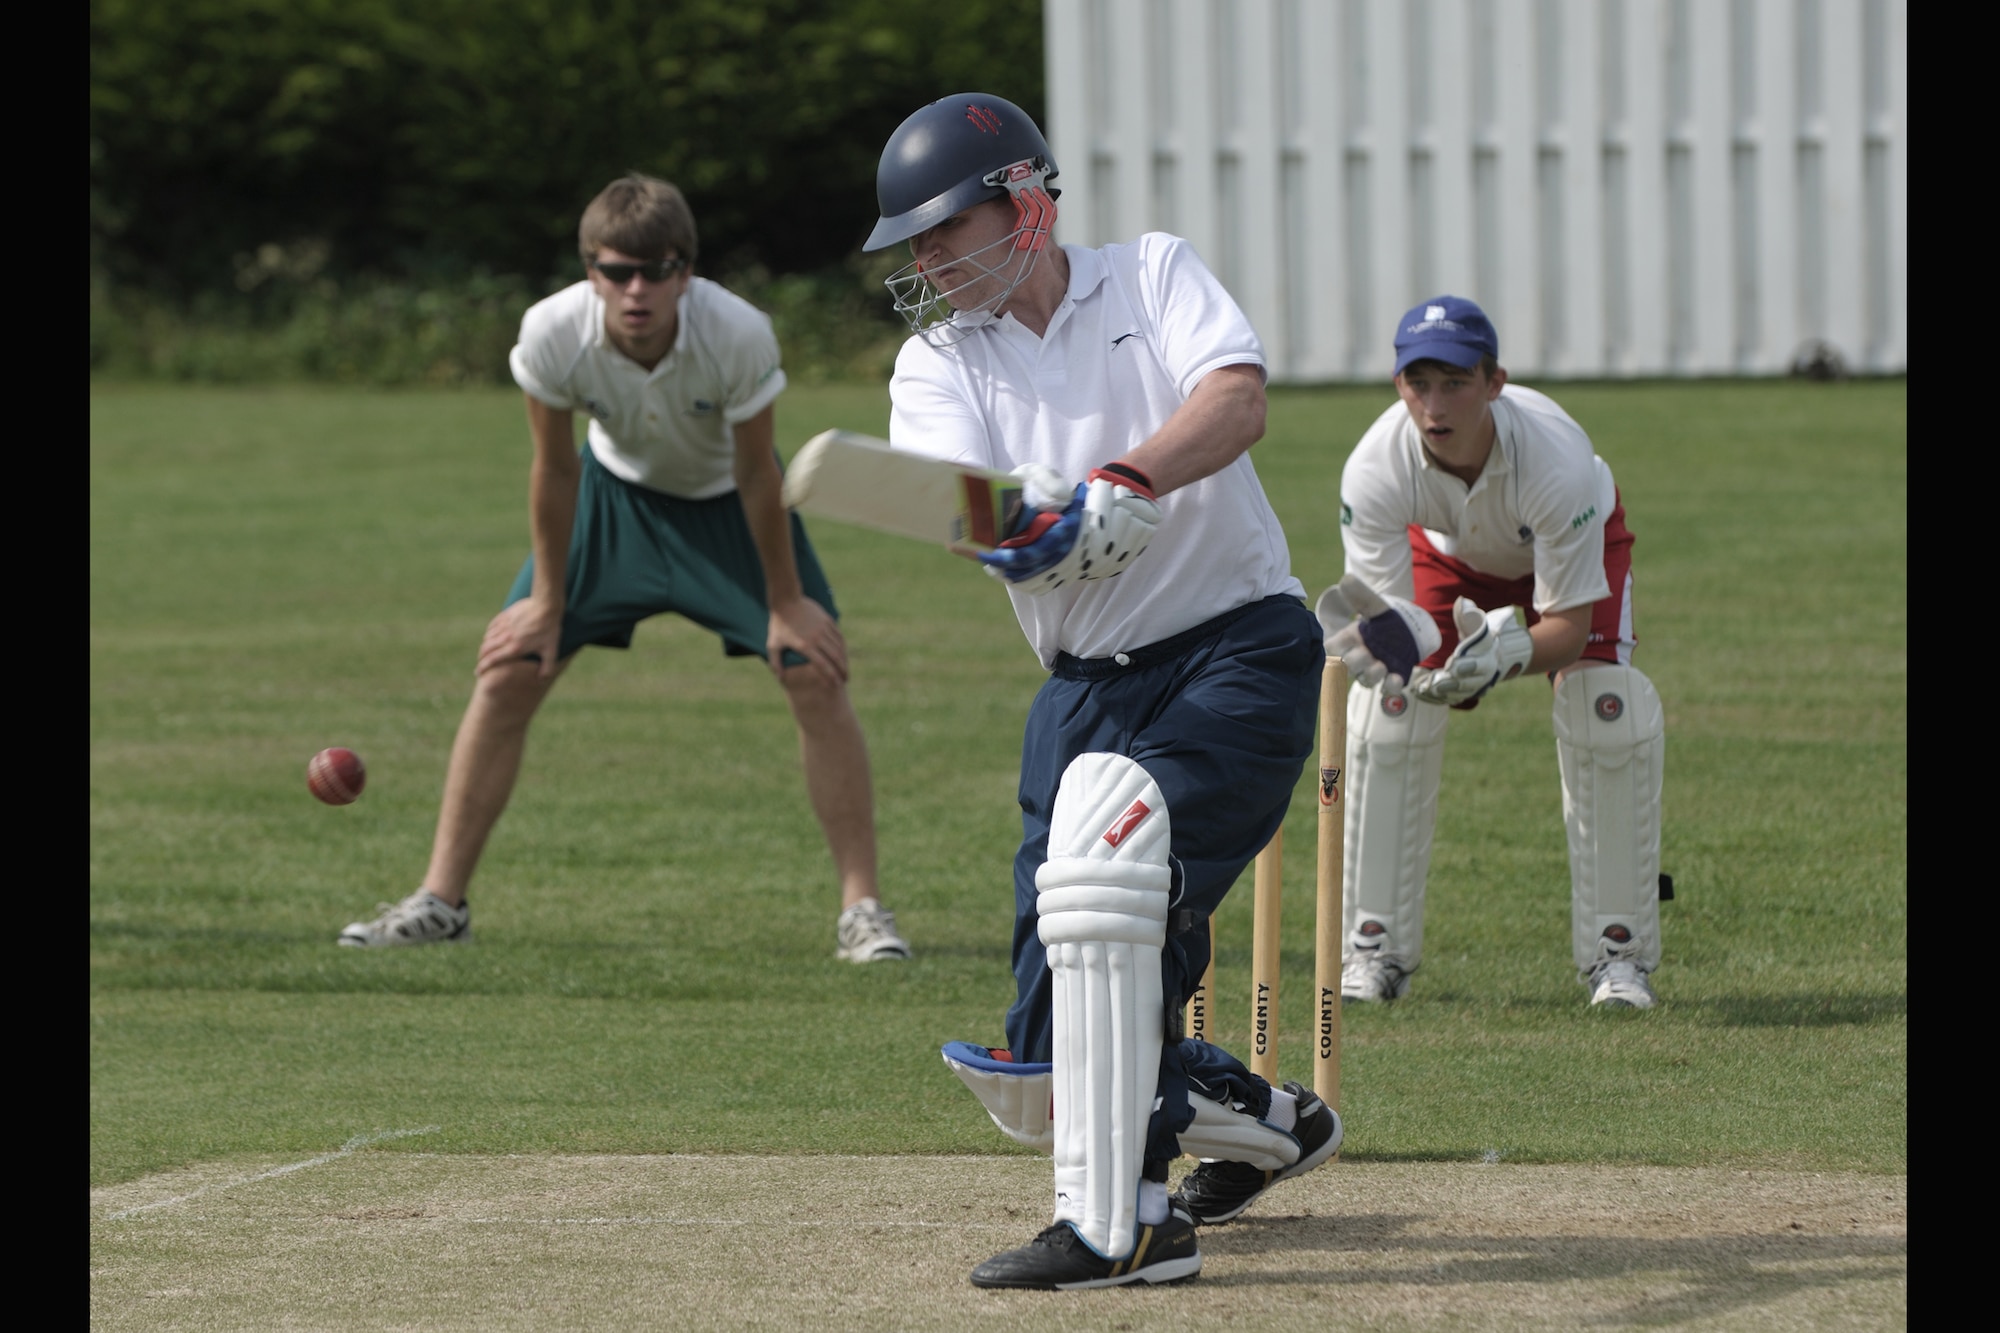 LONGSTANTON, United Kingdom – Maj. Randy Leach, 423rd Medical Squadron, swings for the ball a Longstanton Grasshopper bowled during the first game played by the team Aug. 19 at Longstanton Bowls Club in Longstanton, United Kingdom. Behind each batsman is a target called a wicket. One designated member of the fielding team, the bowler, is given a ball and attempts to bowl the ball from one end of the pitch to the wicket behind the batsman on the other side of the pitch. The batsman tries to prevent the ball from hitting the wicket by striking the ball with a bat. If the bowler succeeds in hitting the wicket, or if the ball, after being struck by the batsman, is caught by the fielding team before it touches the ground, the batsman is dismissed. (U.S. Air Force photo by Master Sgt. John Barton)